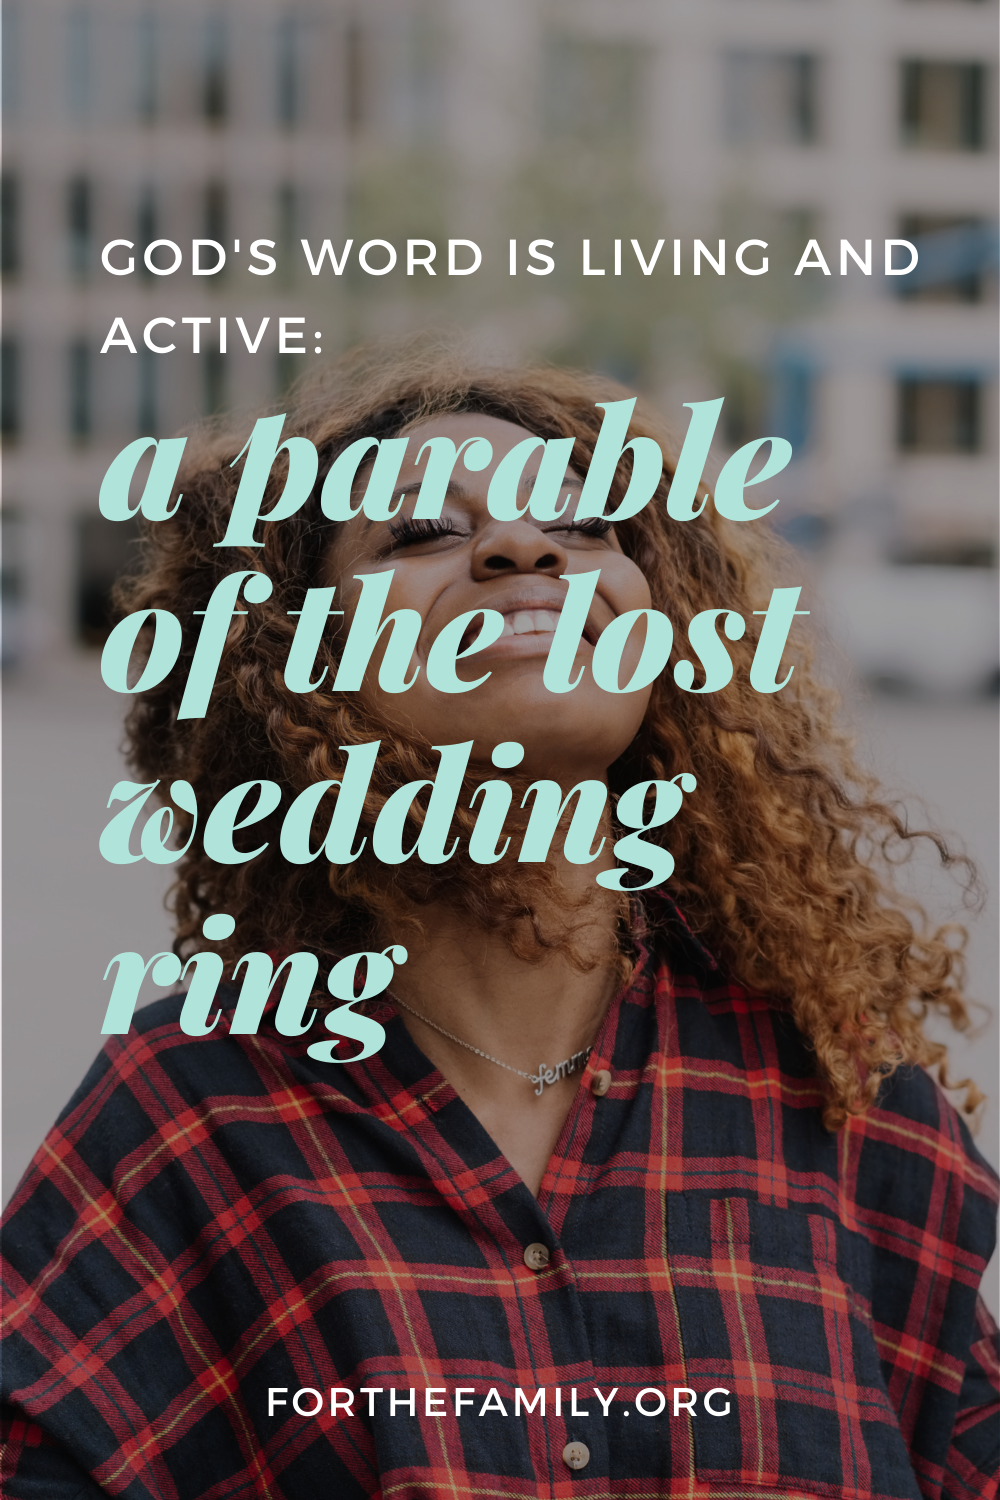 God’s Word is Living and Active: A Parable of the Lost Wedding Ring